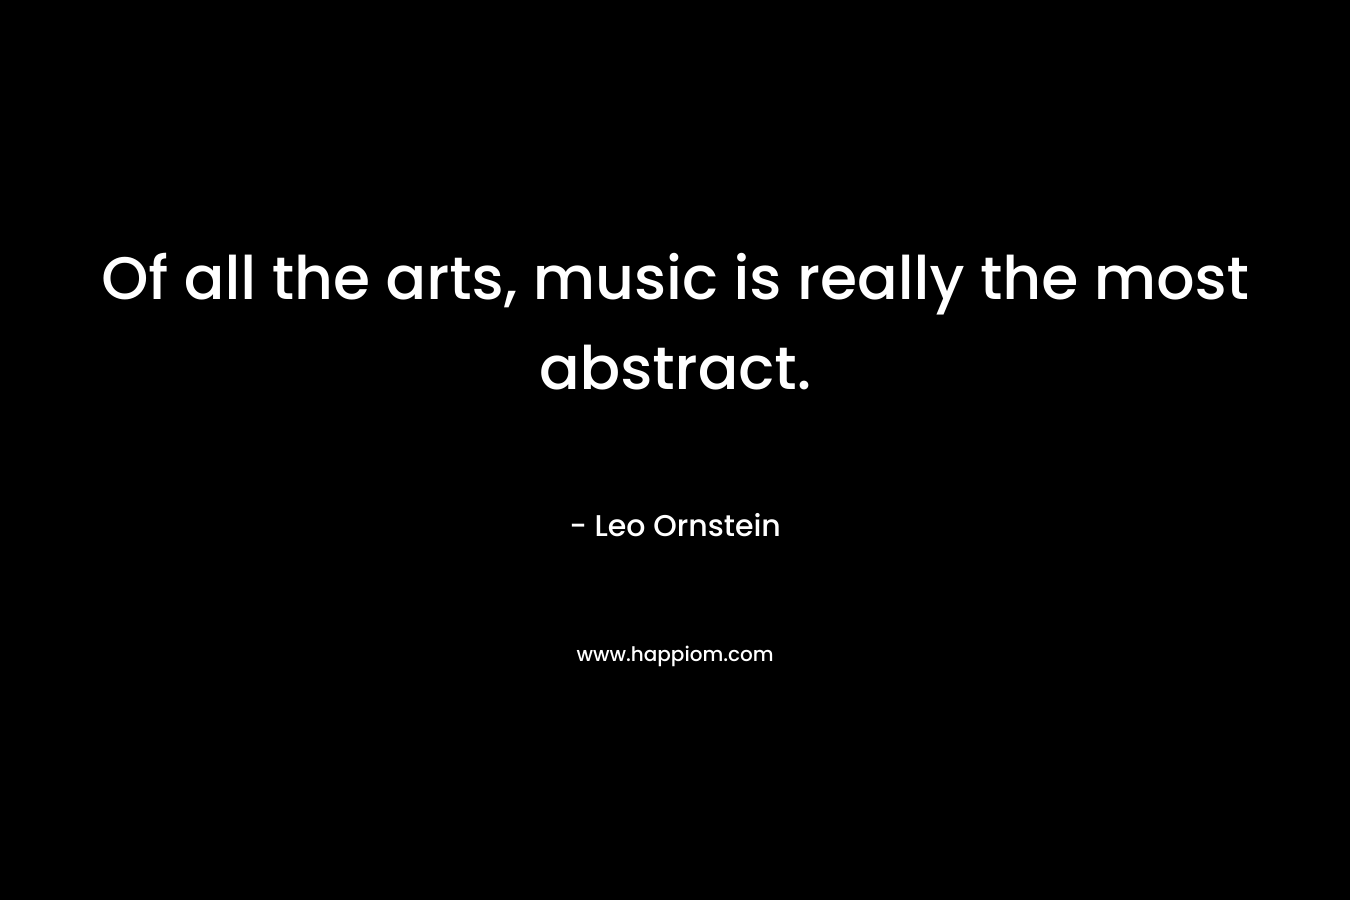 Of all the arts, music is really the most abstract.